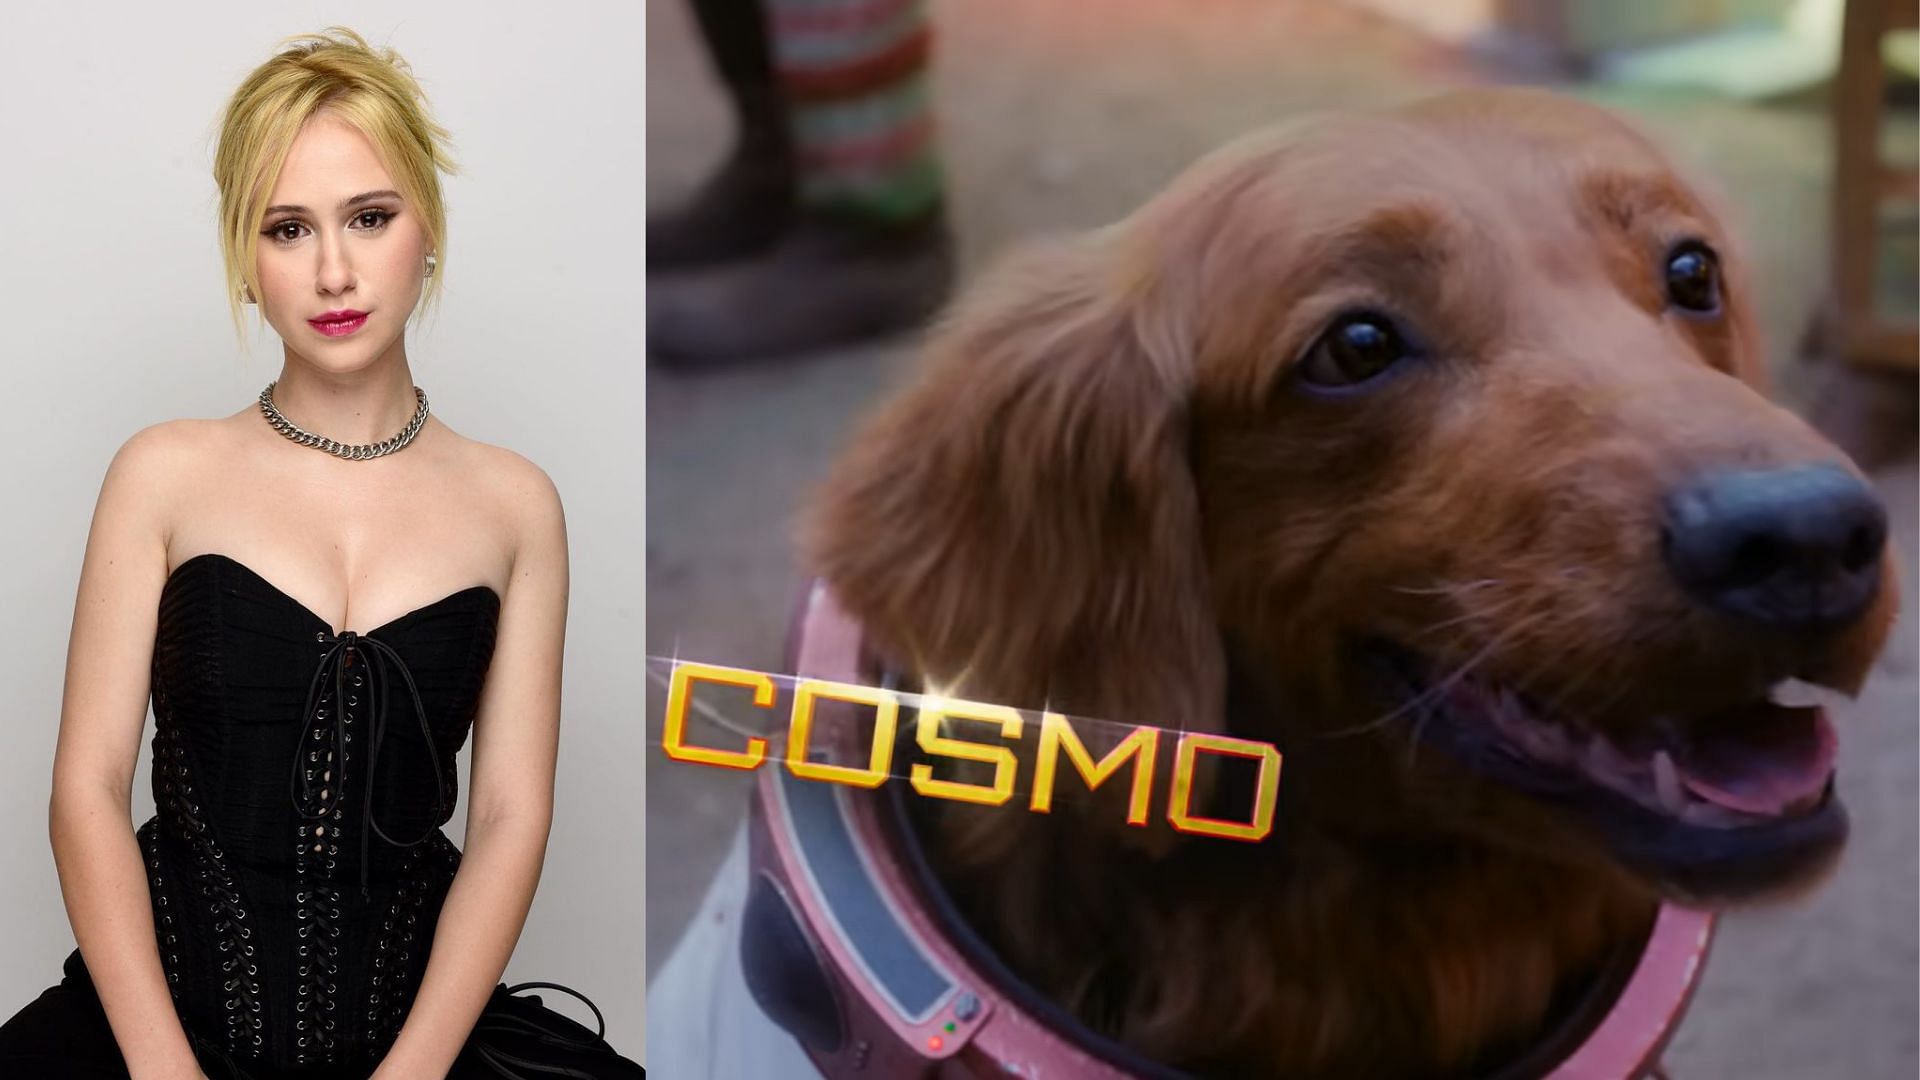 Maria Bakalova plays Cosmo in The Guardians of the Galaxy Holiday Special (Images Via mariabakalovaofficial/Instagram and Marvel Entertainment/YouTube)